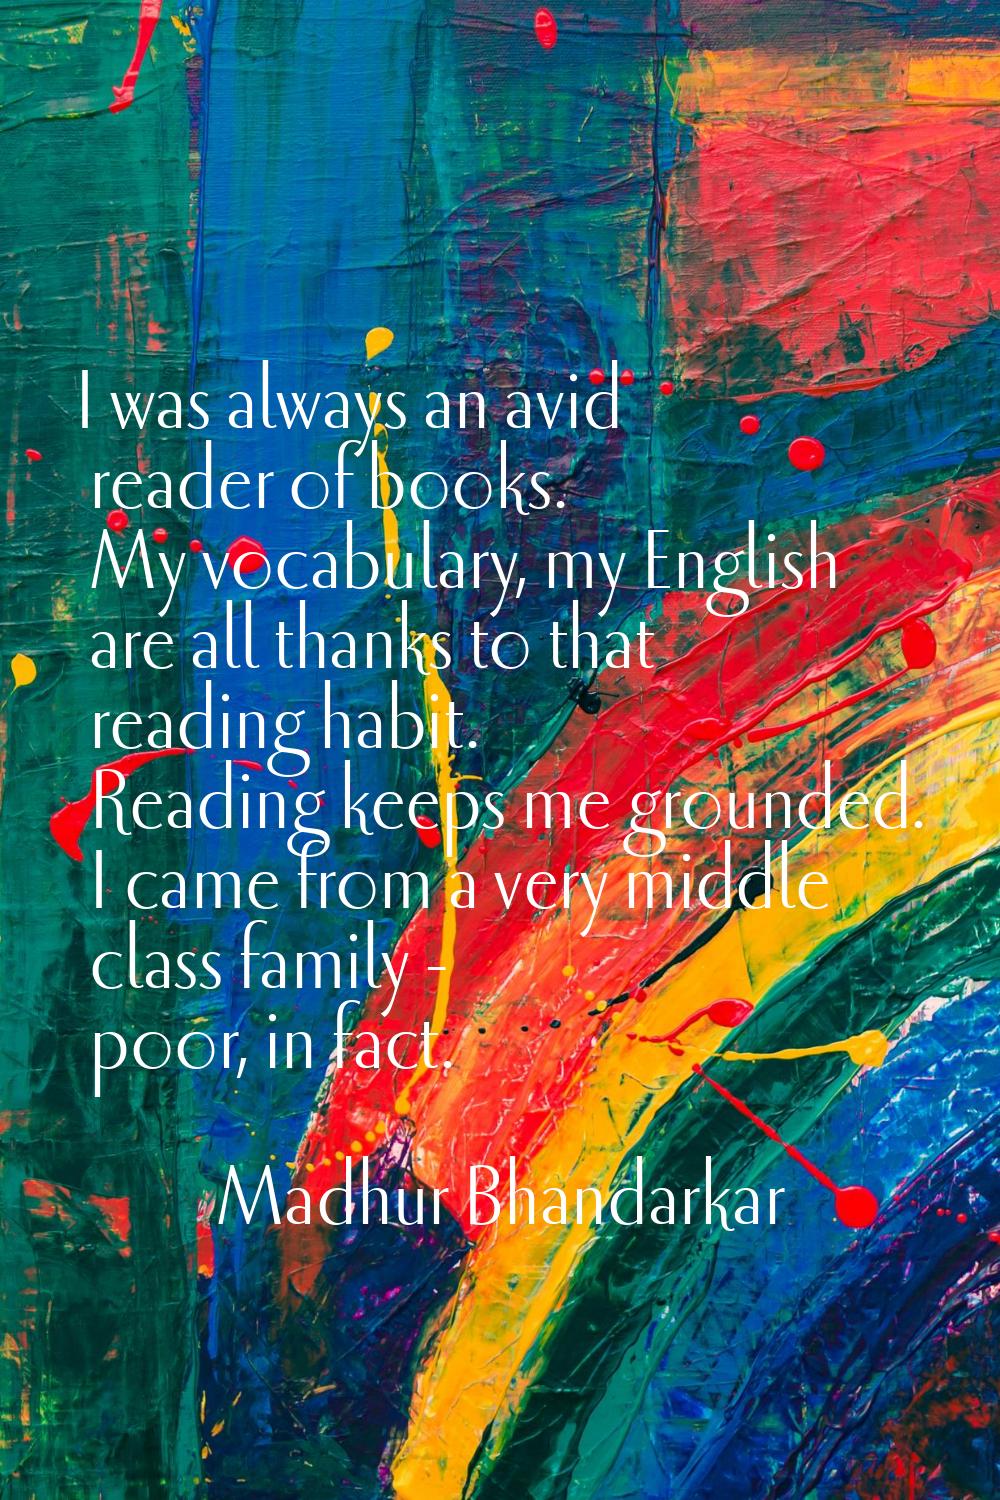 I was always an avid reader of books. My vocabulary, my English are all thanks to that reading habi